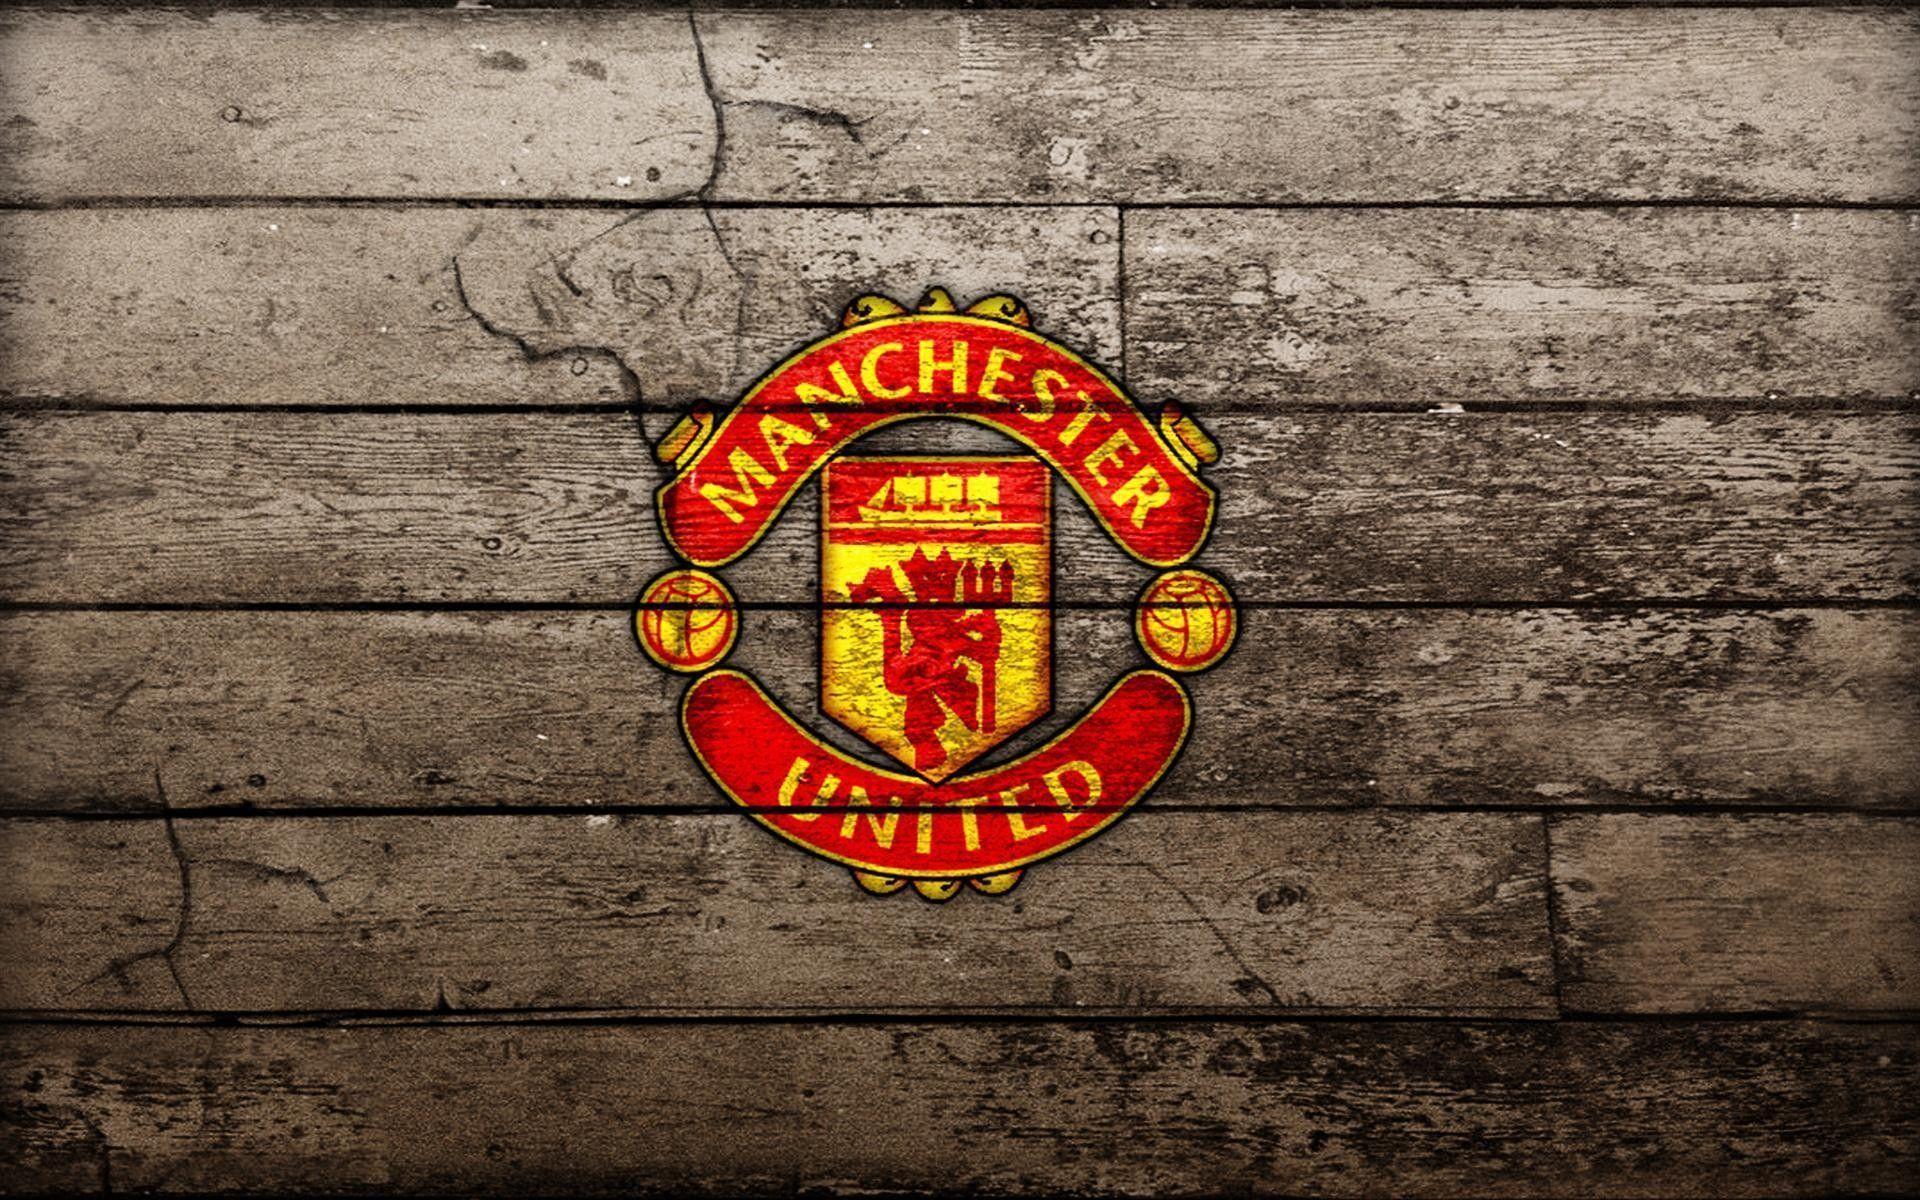 Manchester United Wallpapers HD - Wallpaper Cave